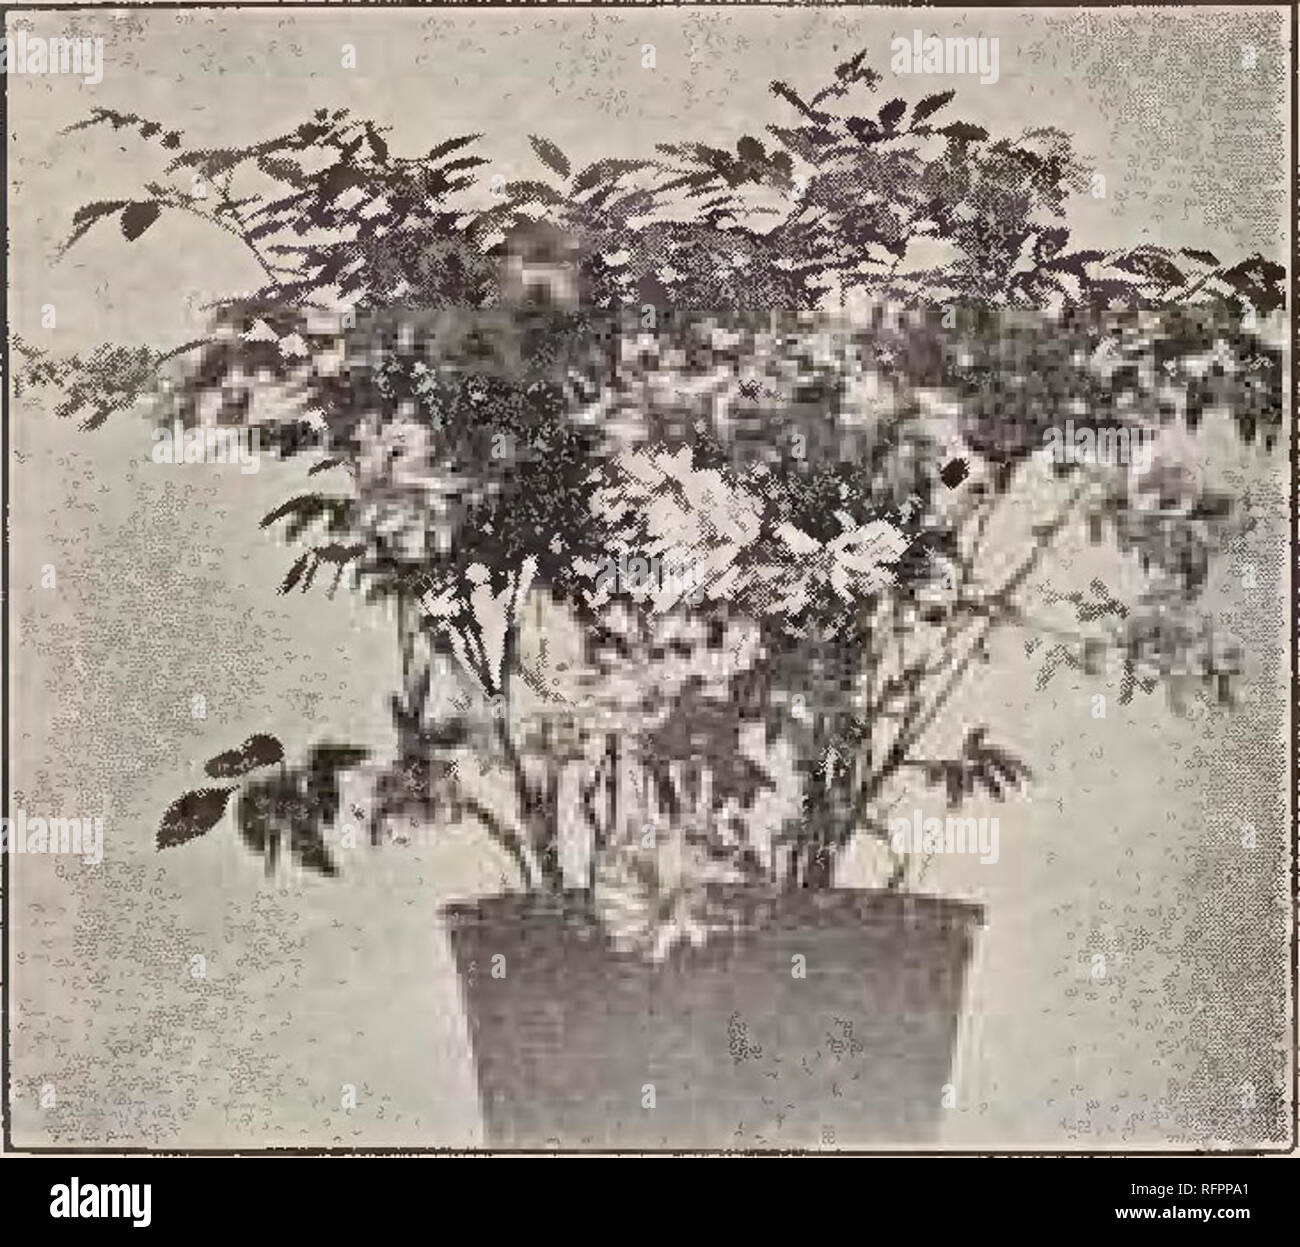 . Descriptive catalogue of the Yokohama Nursery Co., Limited. Seed industry and trade; Flowers Catalogs; Fruit Catalogs; Trees Catalogs; Shrubs Catalogs. 1% CATALOGUE OF THE YOKOHAMA NURSERY Co., Ltd. (1911).. INDIGOFERA DECORA. Conandron ramondioides, purple flower, large leaves growing in shady and rooky placeâper 10, 90 e.; per 100, $80.00. Conophallus Ifonjak, splendid ornmental tuberous plant, flowers, with enormous spadix, gelatinous food stuff is made from its tubersâper 10, $1.00. Coptis bracbypetala, âper 10, 35c., per 100, $3.00. Dicentra spectabilis, showy perennial pink flower- ing Stock Photo